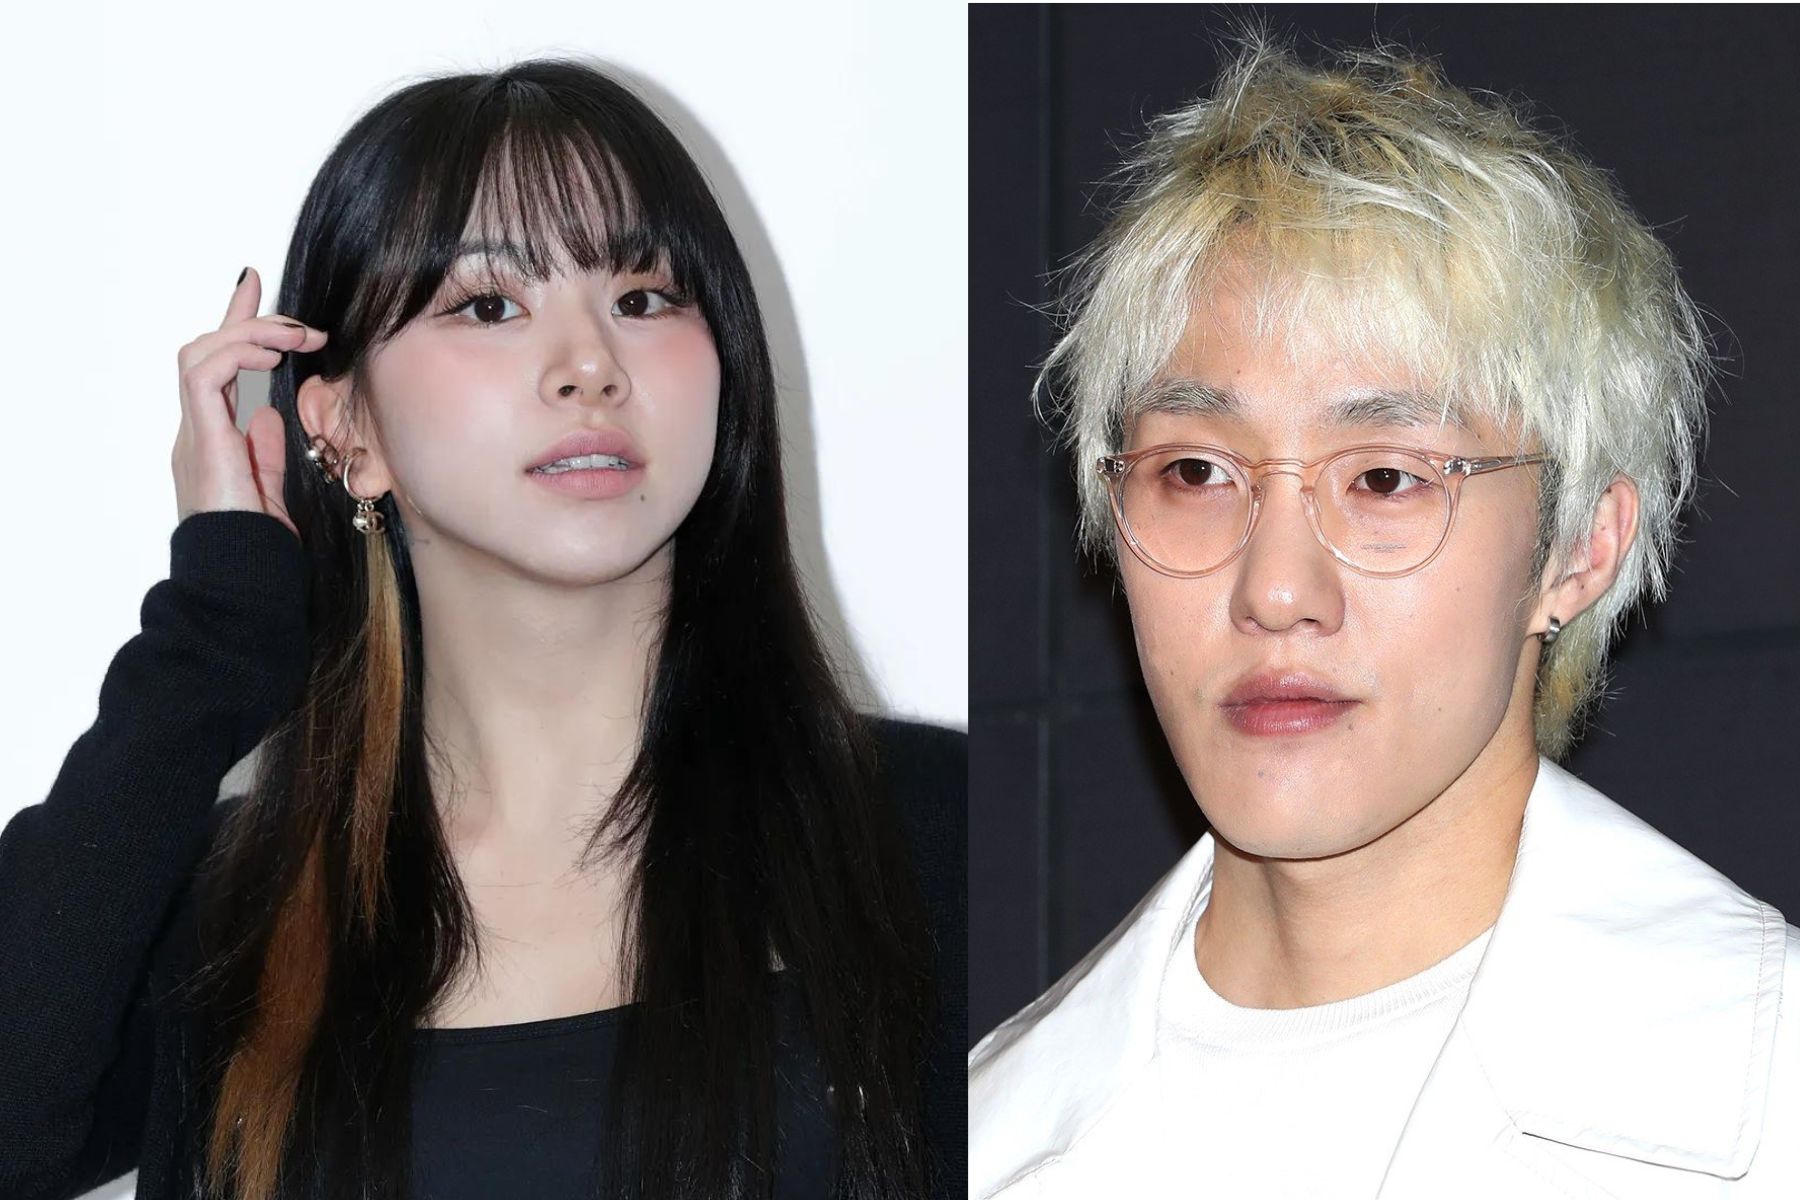 TWICE’s Chaeyoung is dating soloist Zion.T according to korean media